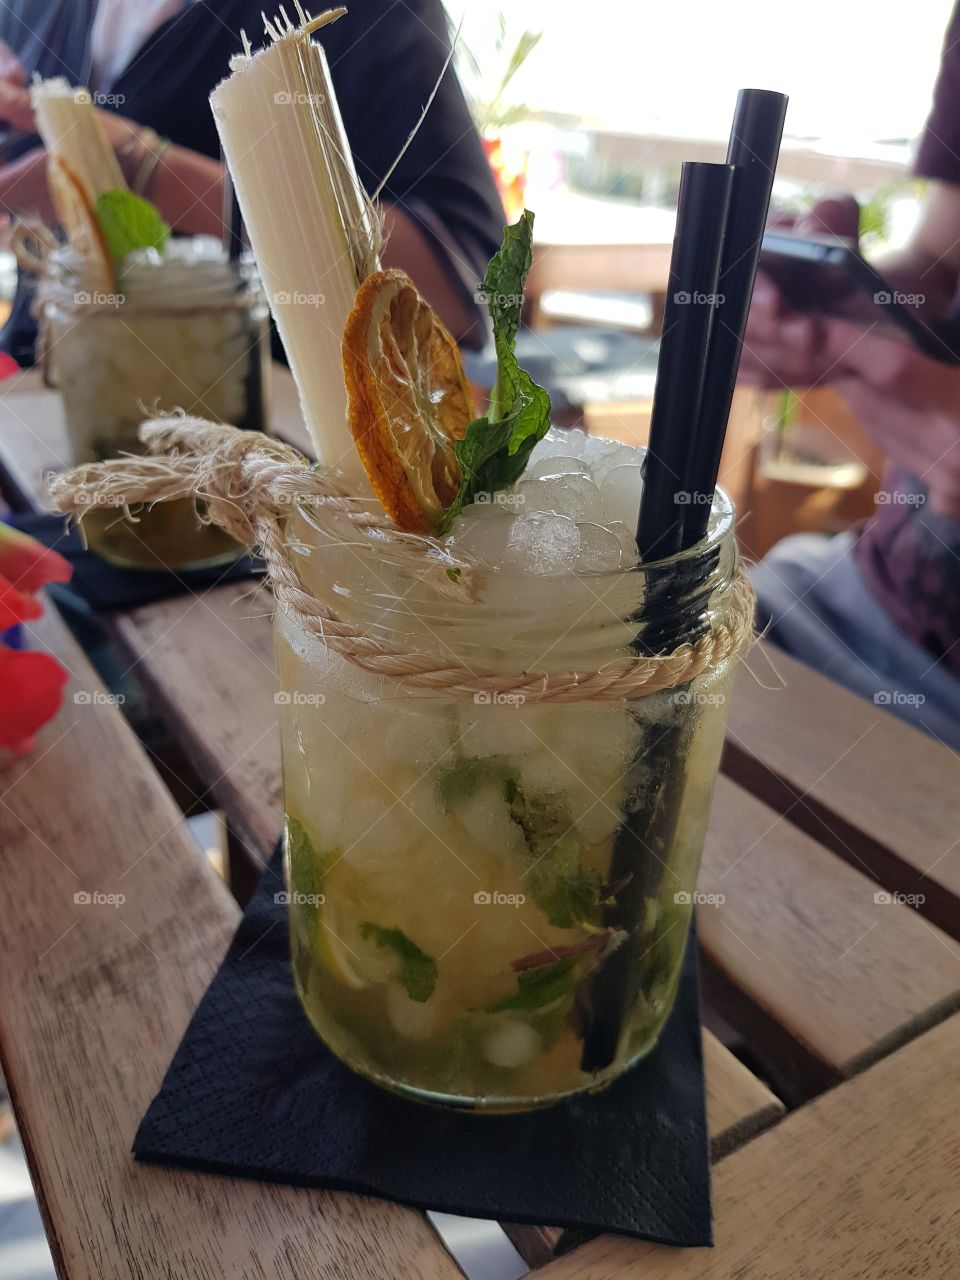 great mojito cocktail with a lot of ice and nice decoration, like sugar cane and straws